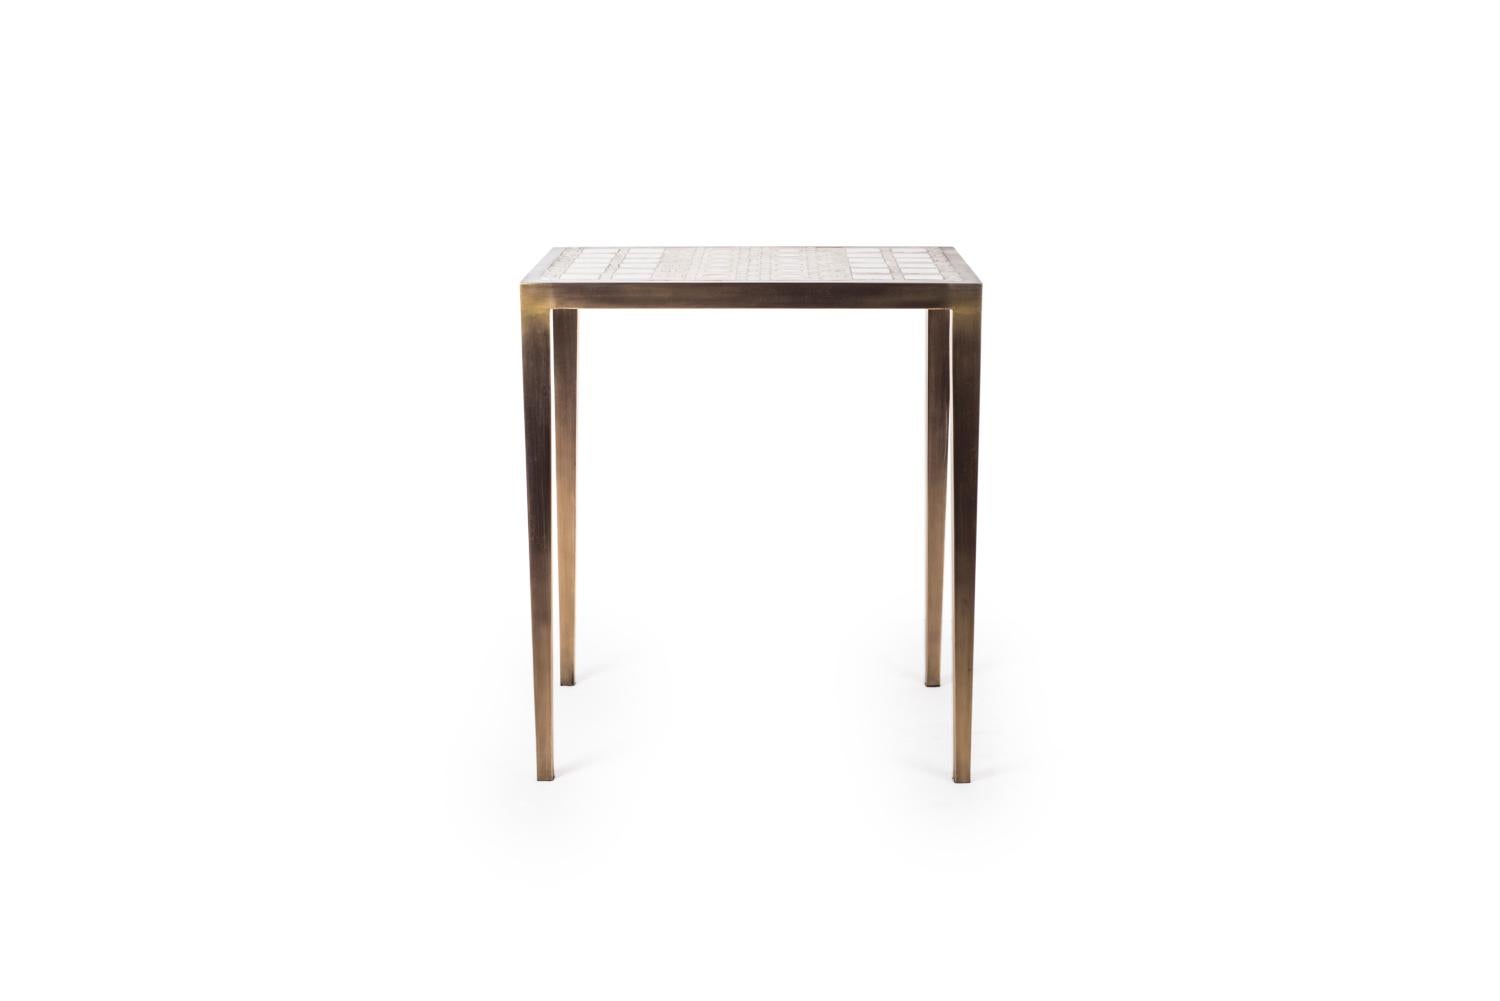 The mix media nesting side table in small is part of a series of nesting side tables (sold separately). One can purchase the tables on their own or buy them as a set to create elegant and geometric shapes. This piece demonstrates the incredible